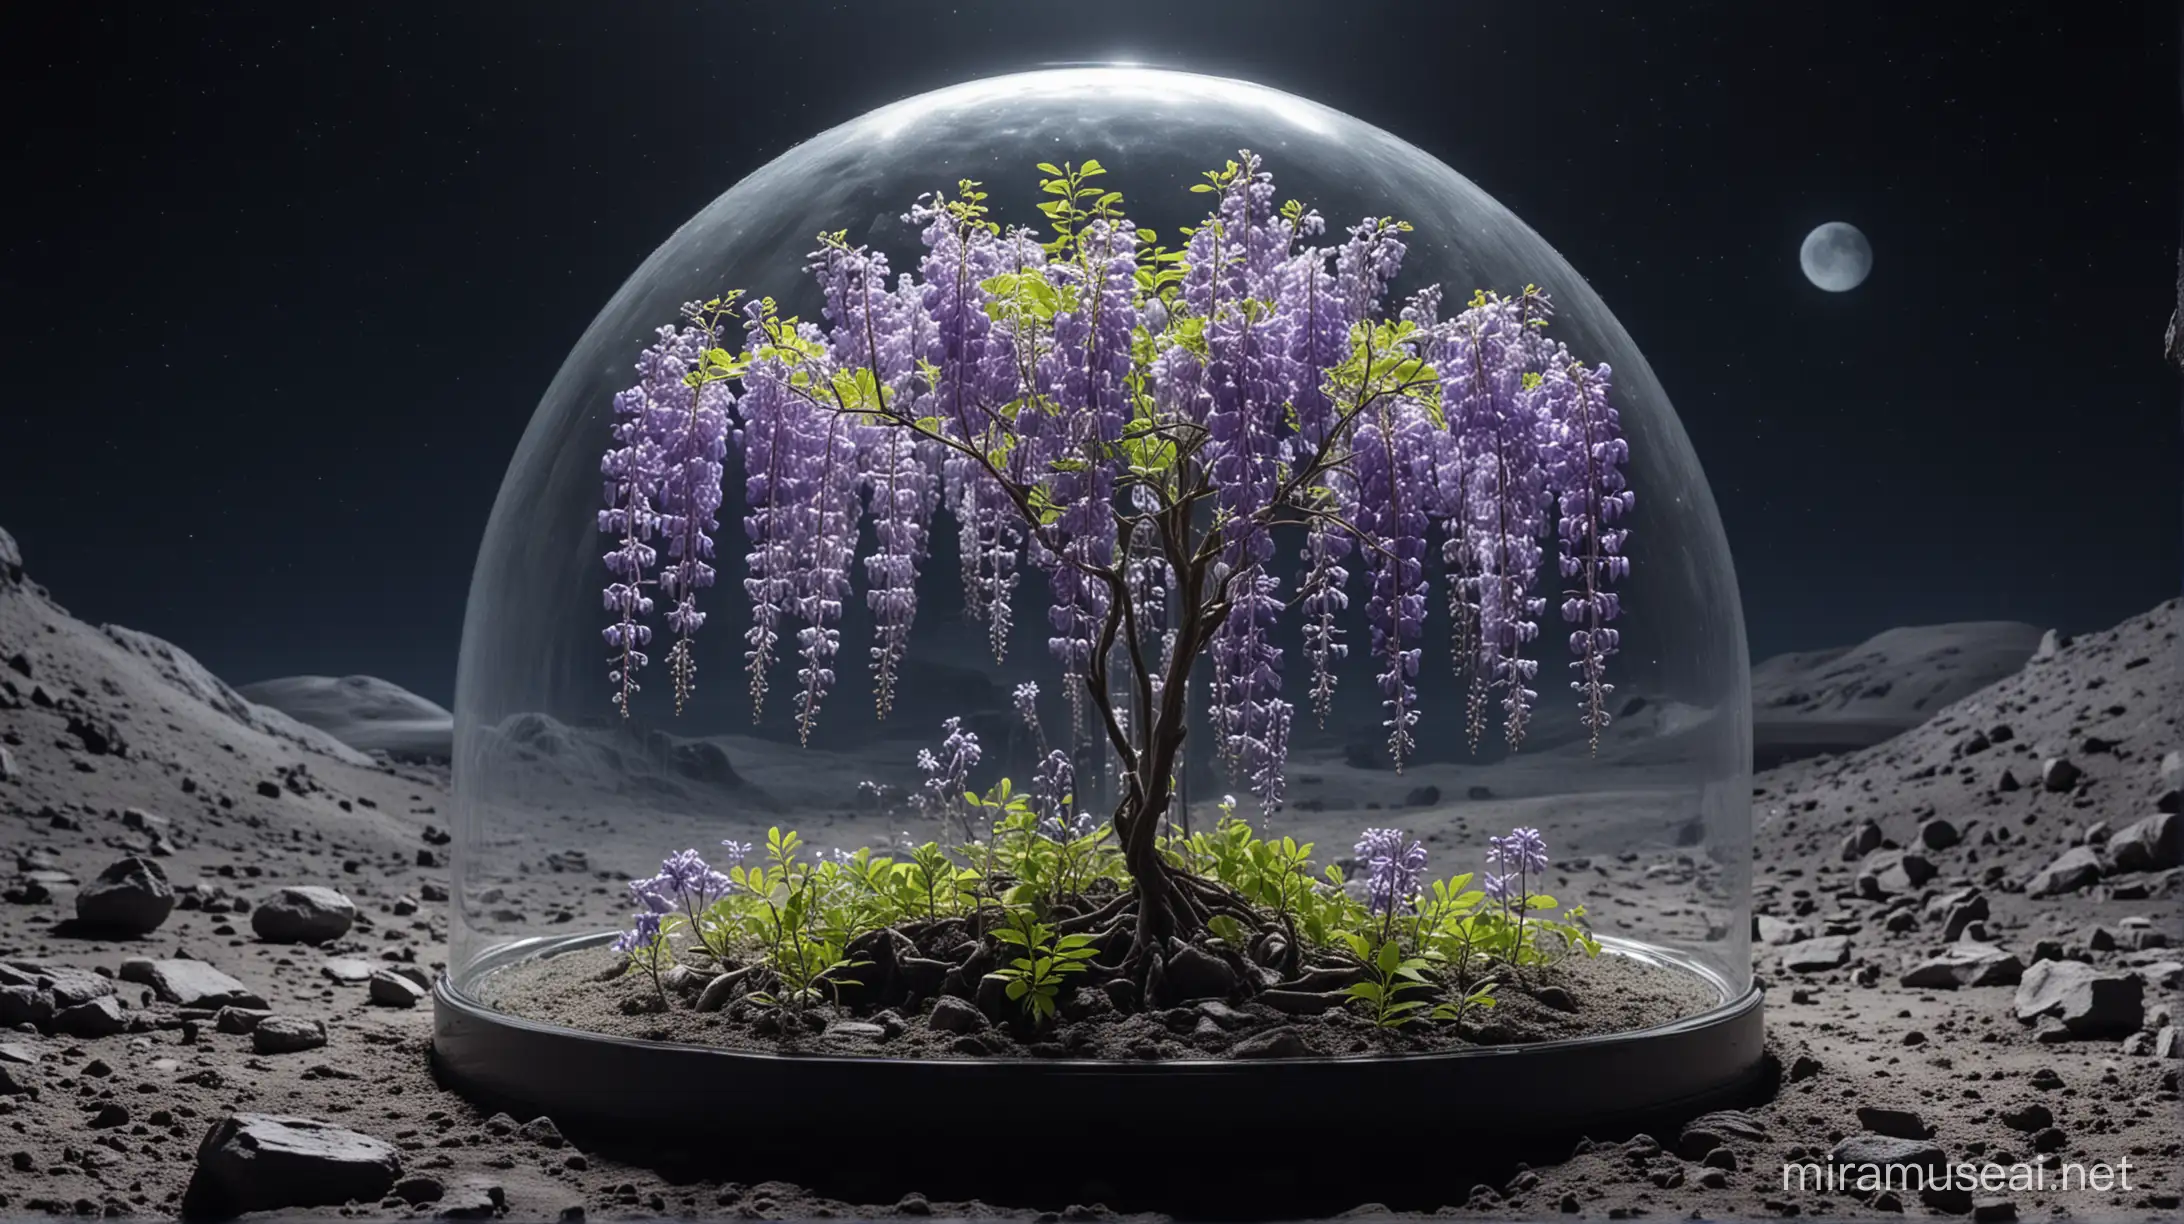 wisteria bush under glass dome on  moon surface.